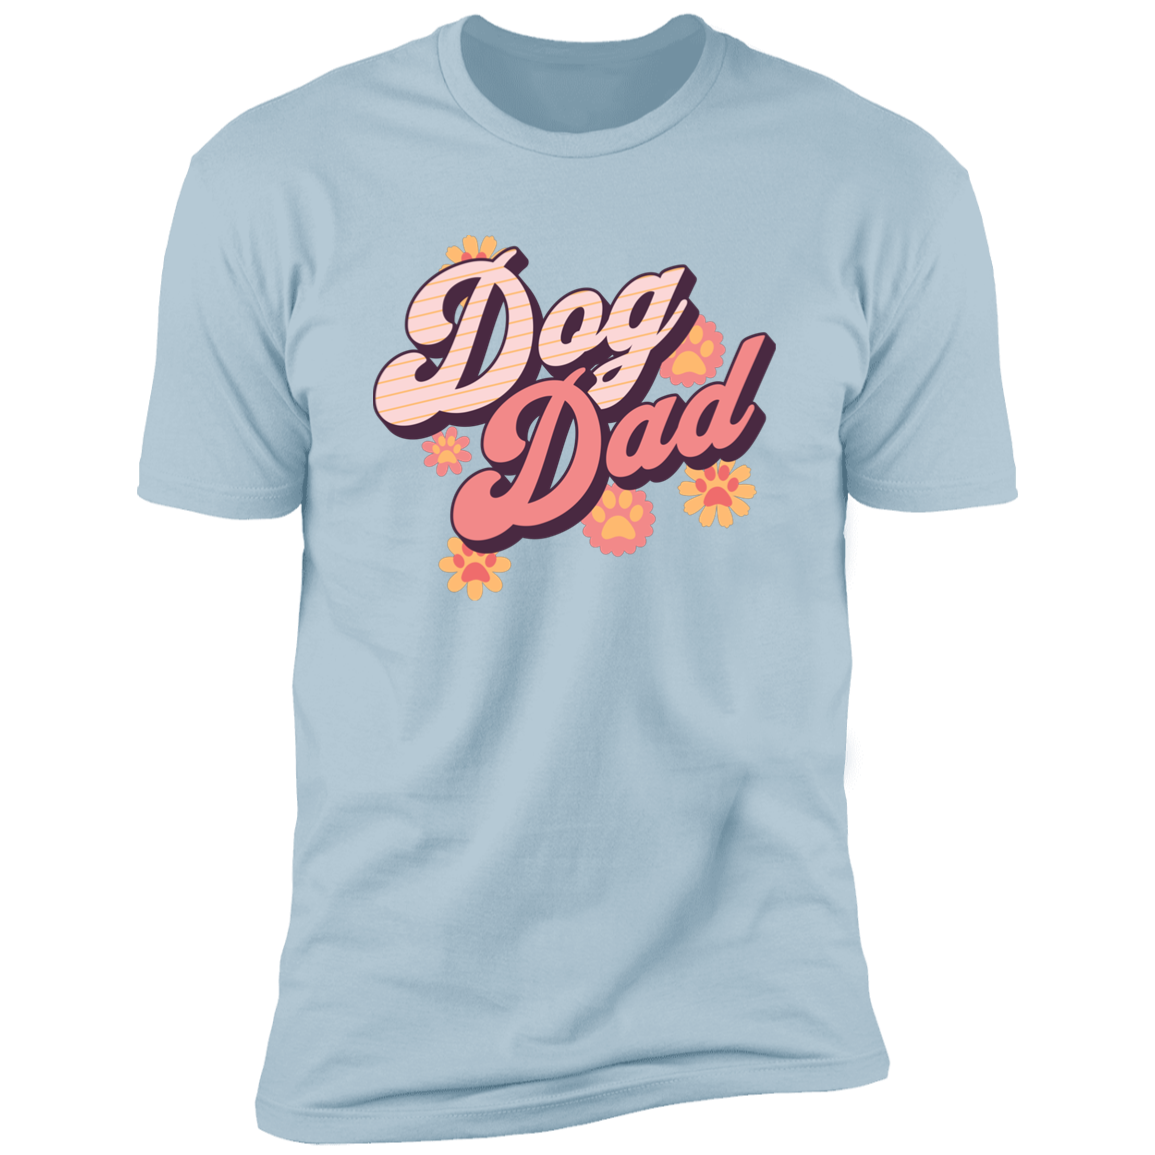 Retro Dog Dad t-shirt, Dog dad shirt, Dog T-shirt for humans, in light blue